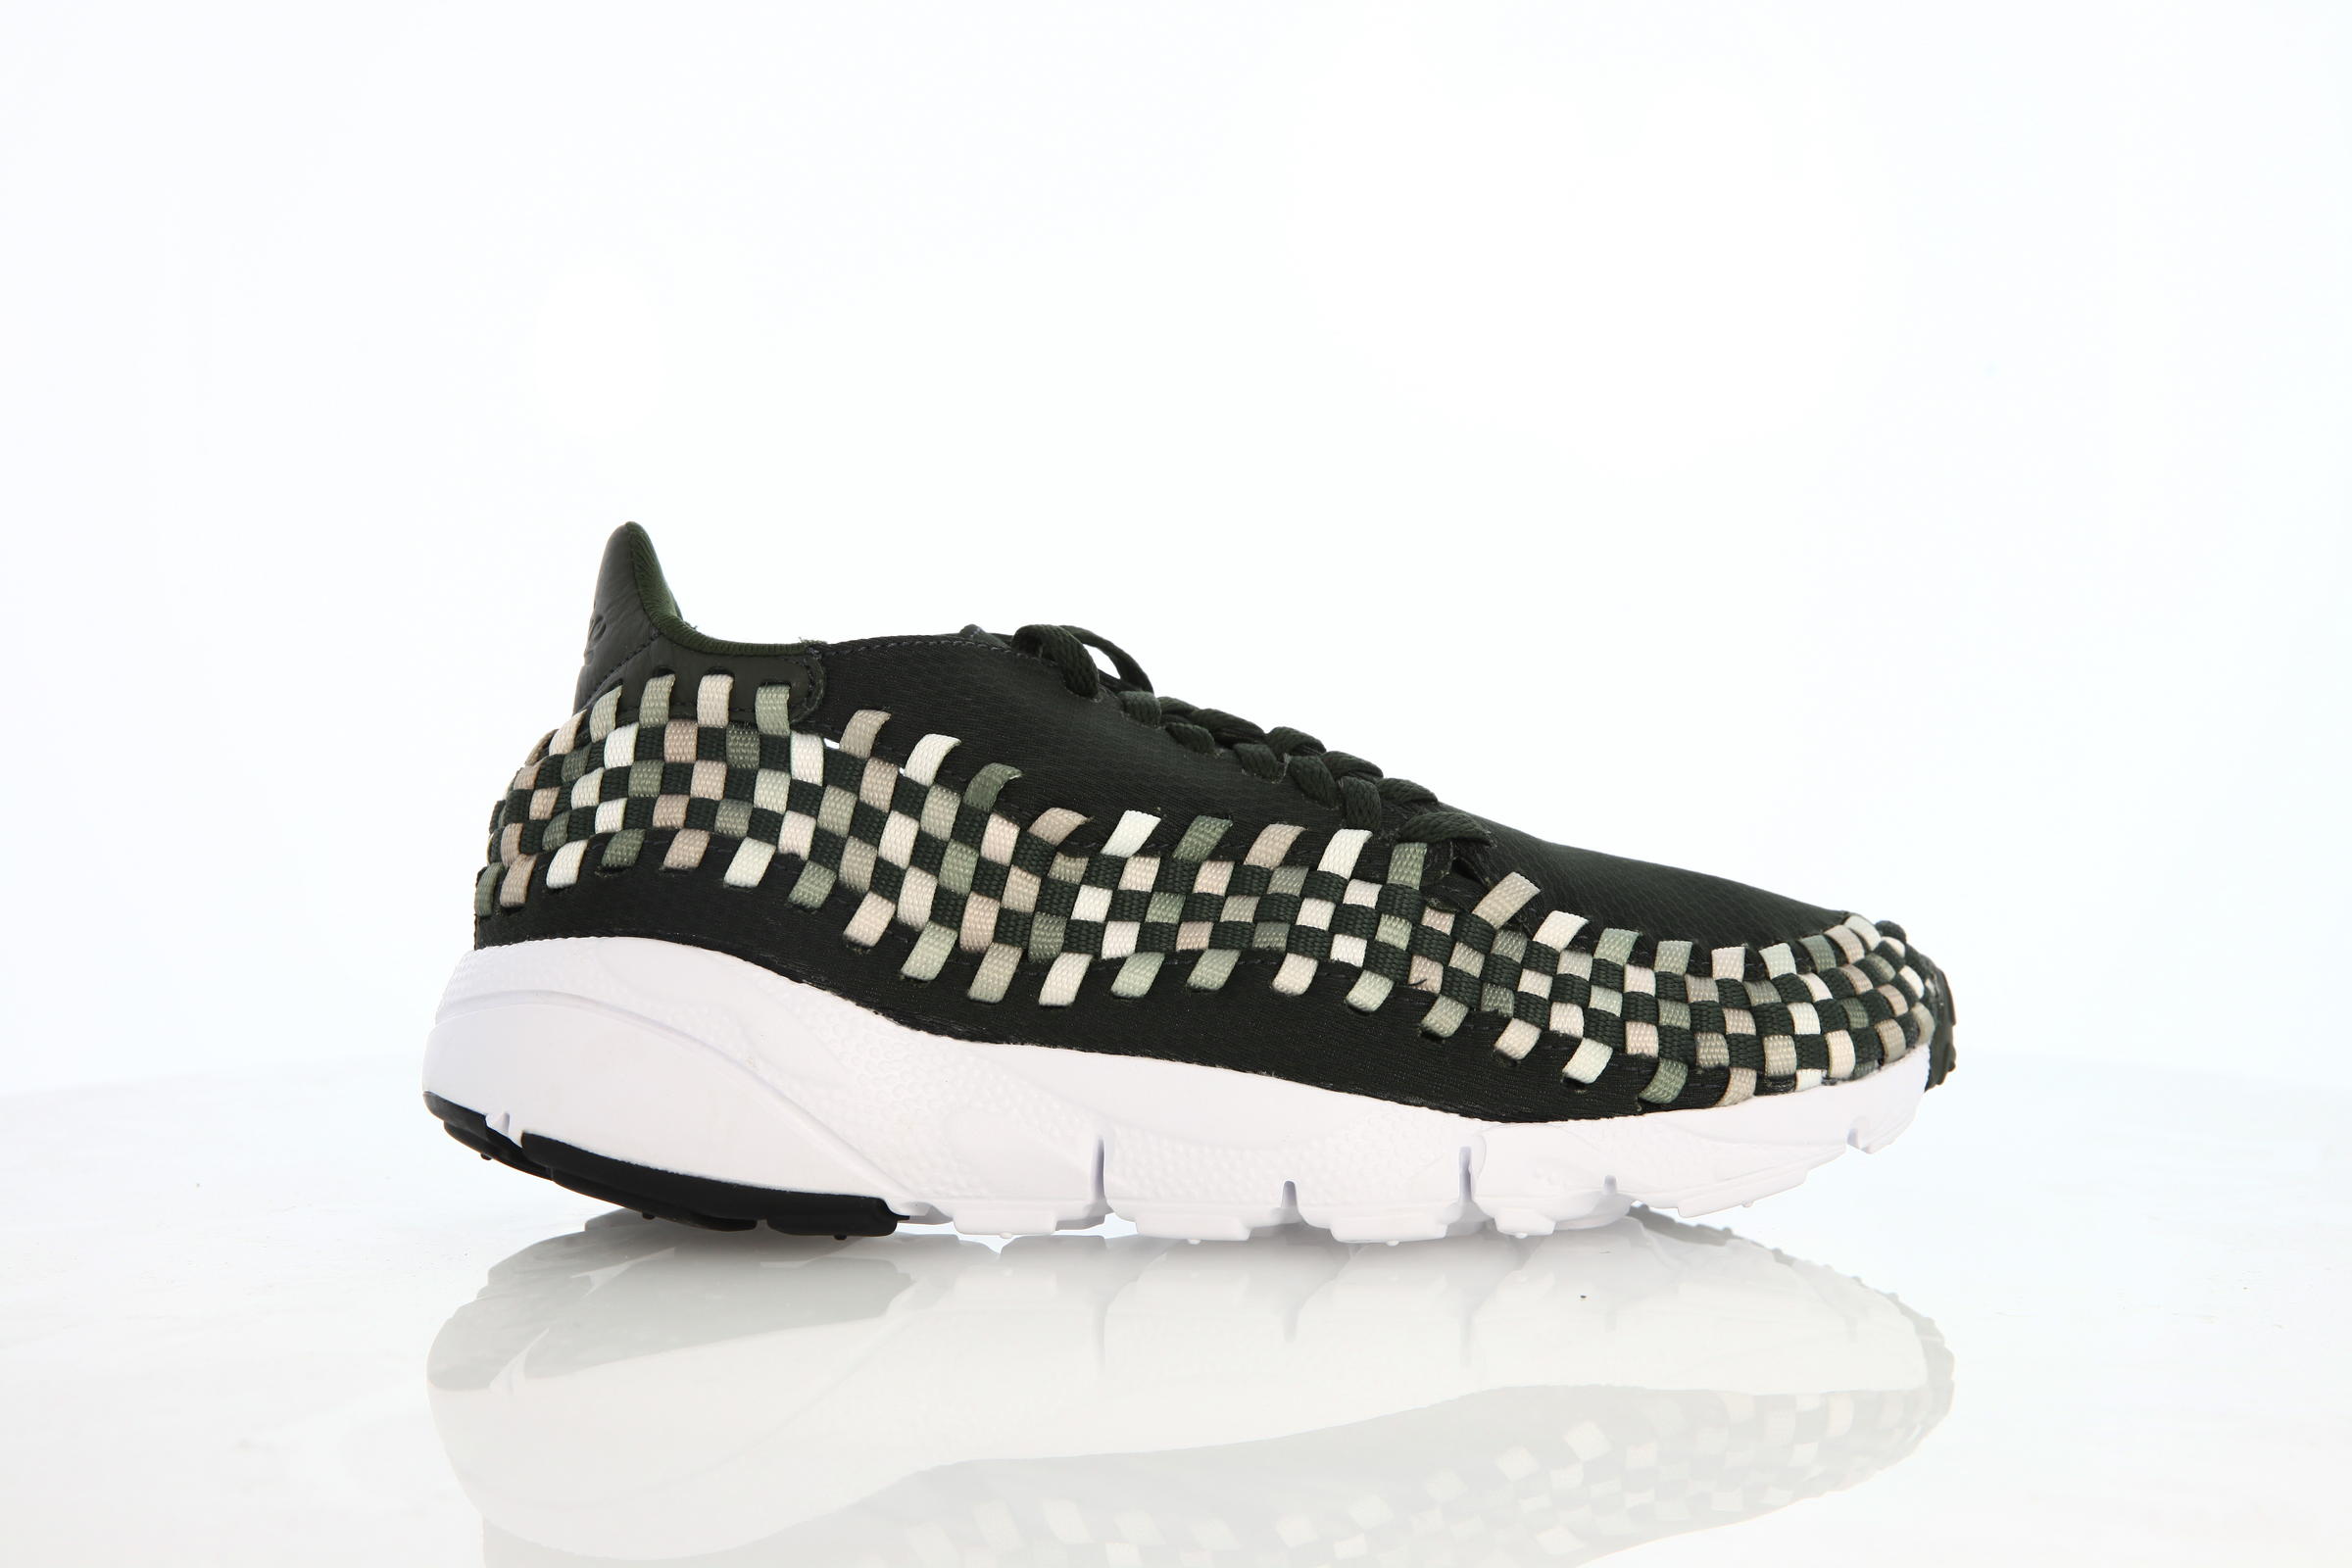 Nike Air Footscape Woven Nm "Sequoia"